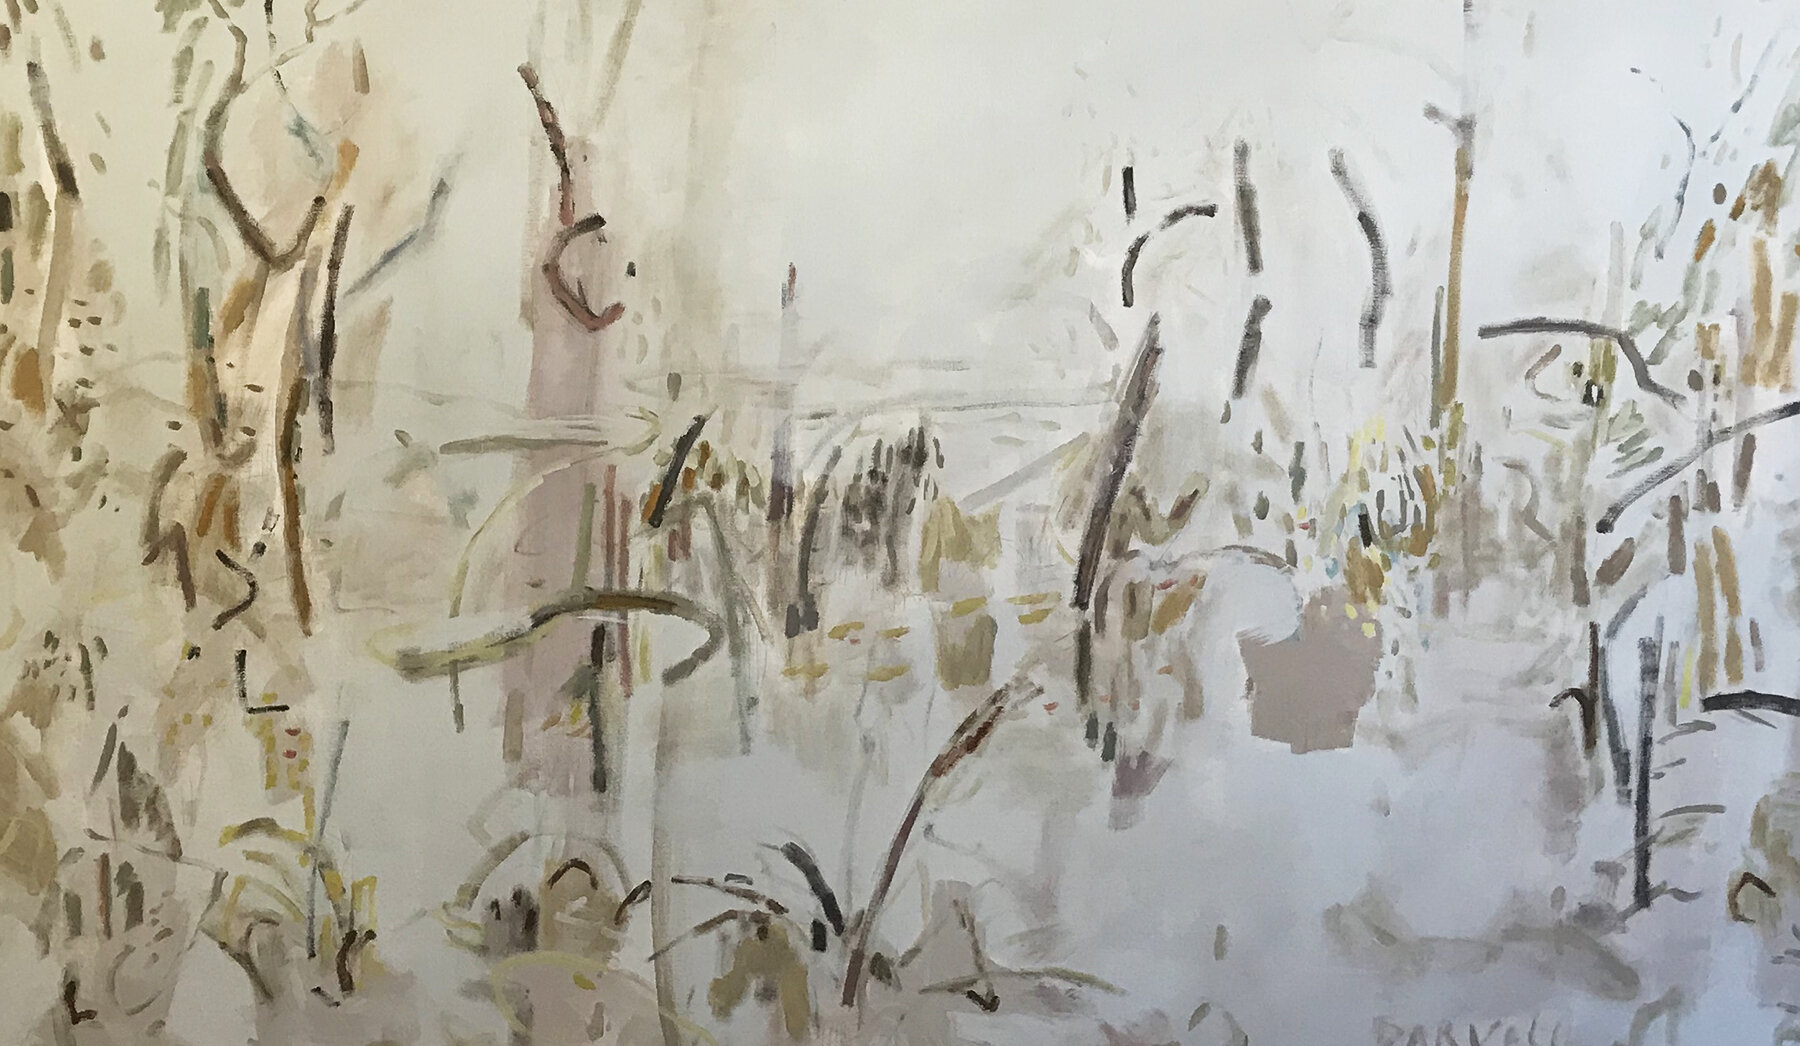   Mooro Katta,  2019  Oil on canvas pastel and pencil 118 x 195.5 cm unframed (exhibited  Rochfort Gallery Sydney status collected) 